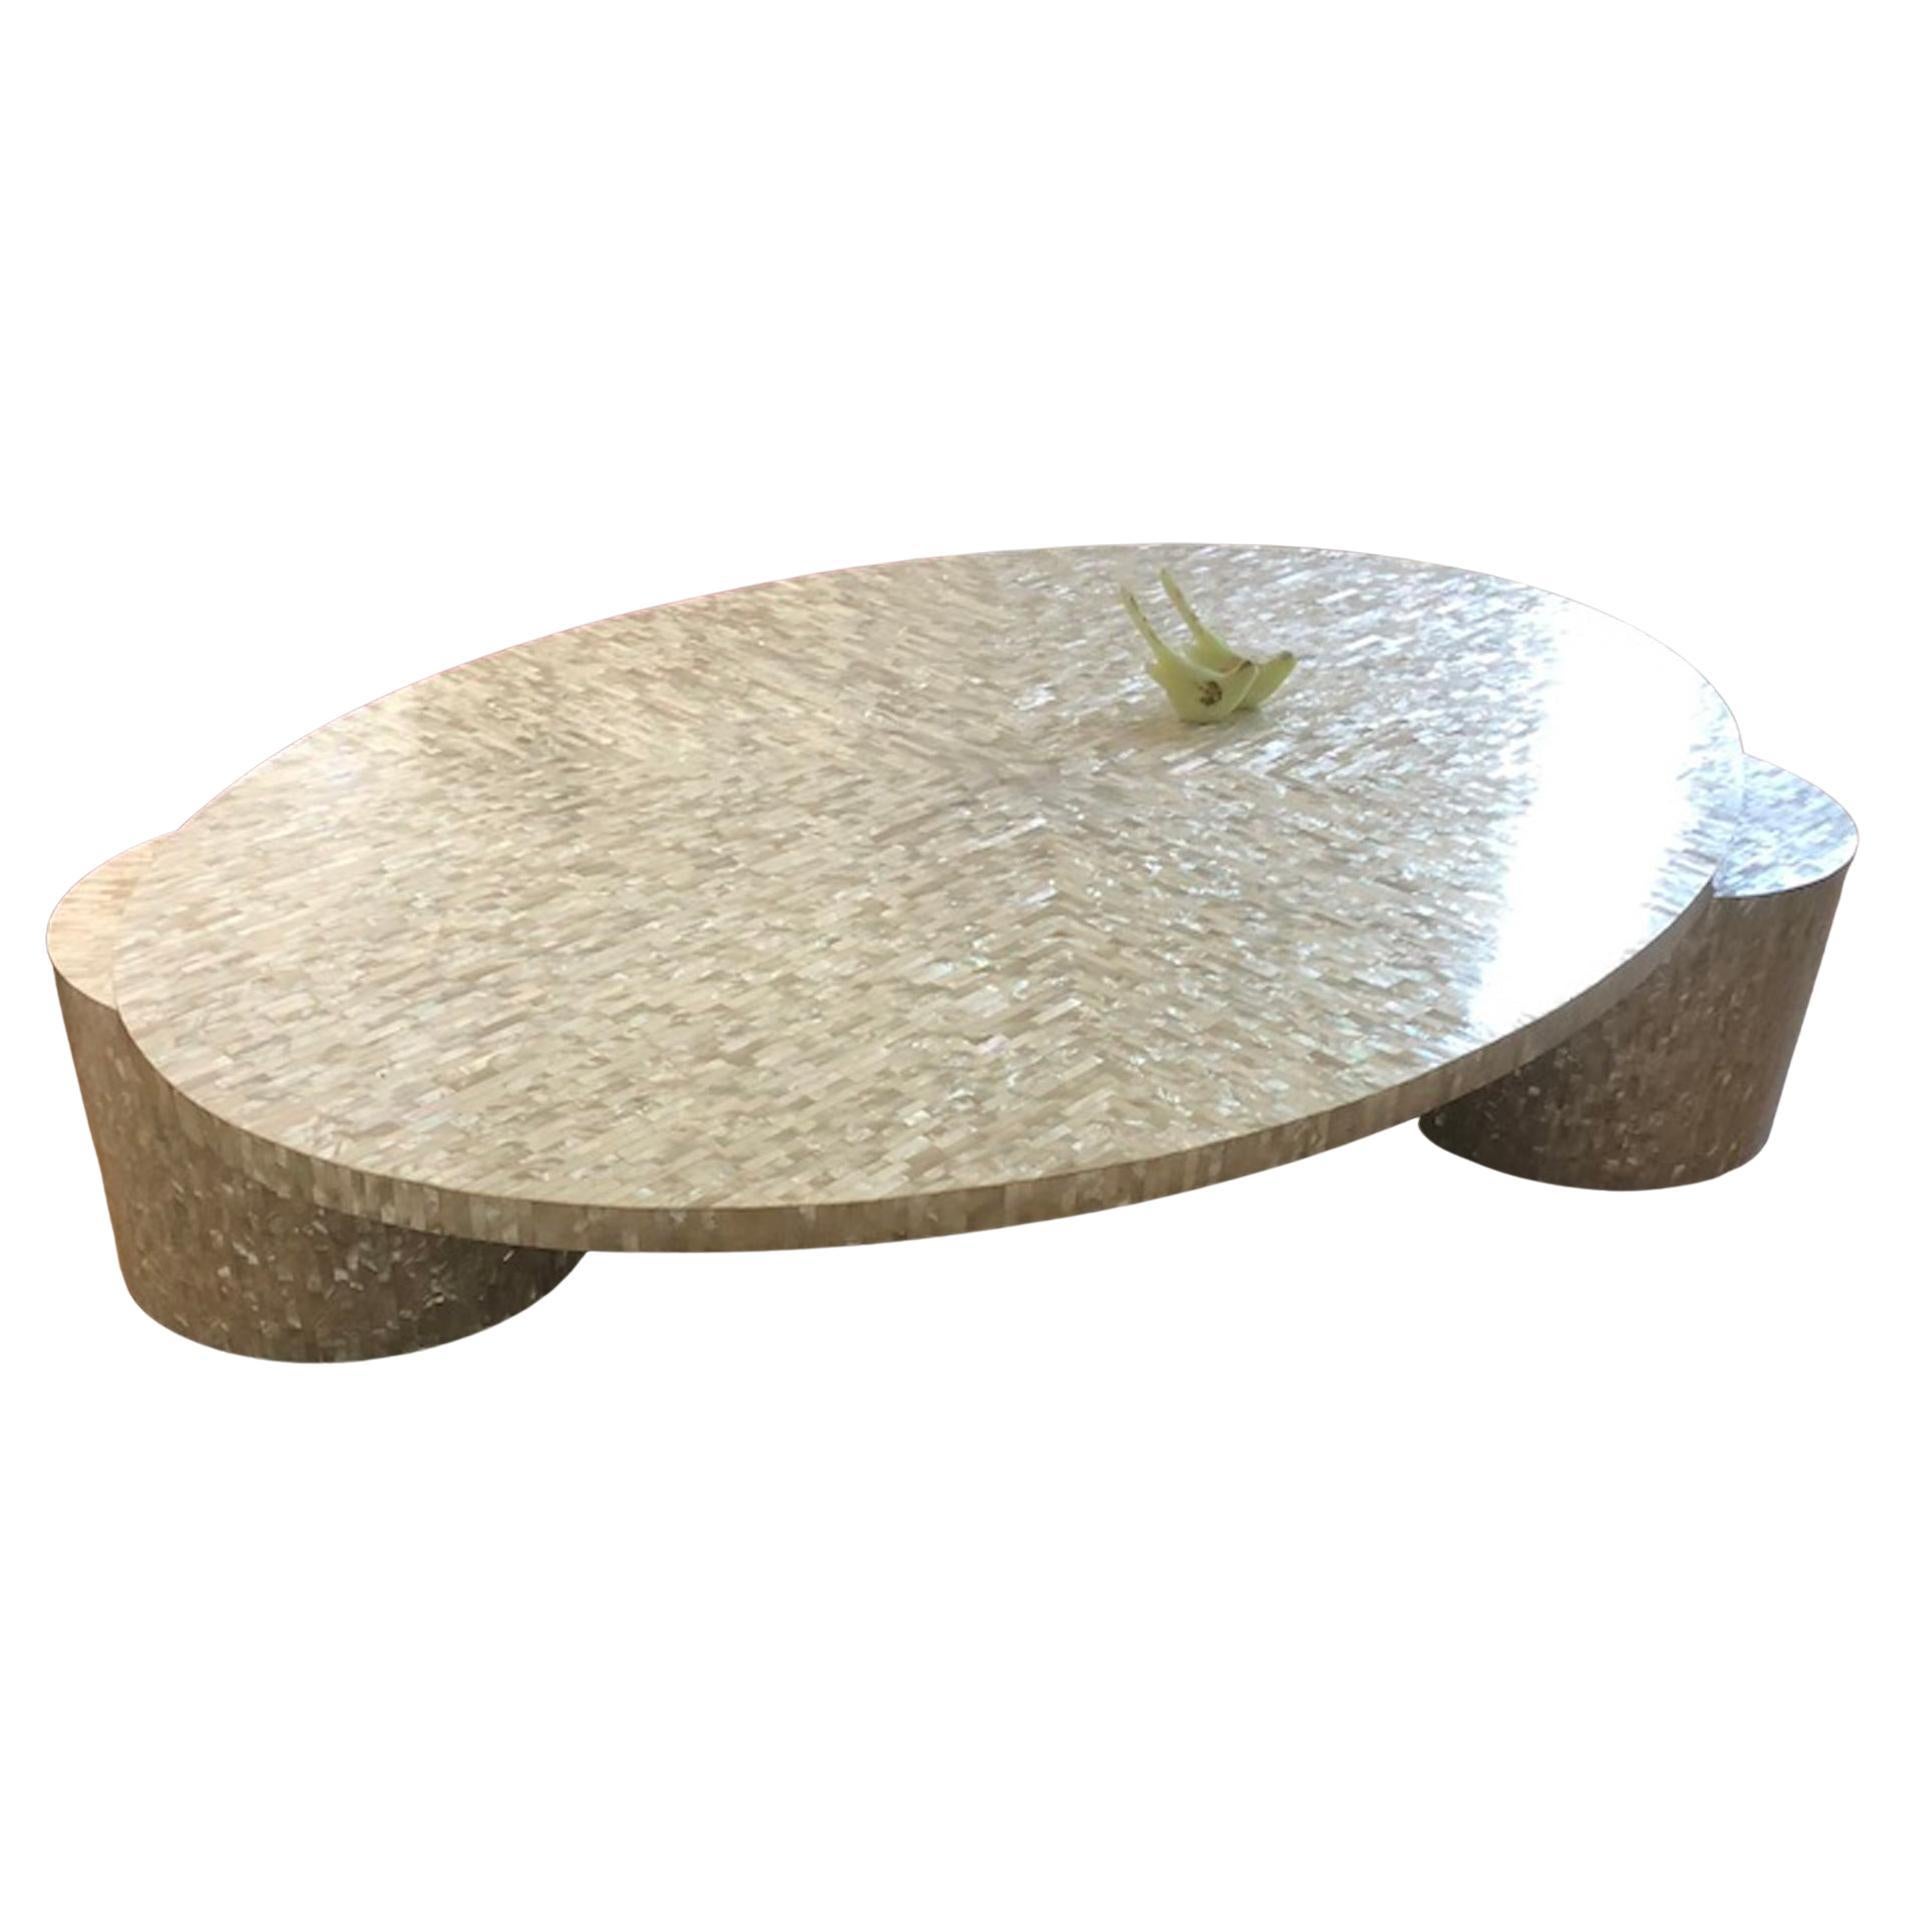 Splendid unique Memphis style mother of pearl coffee table